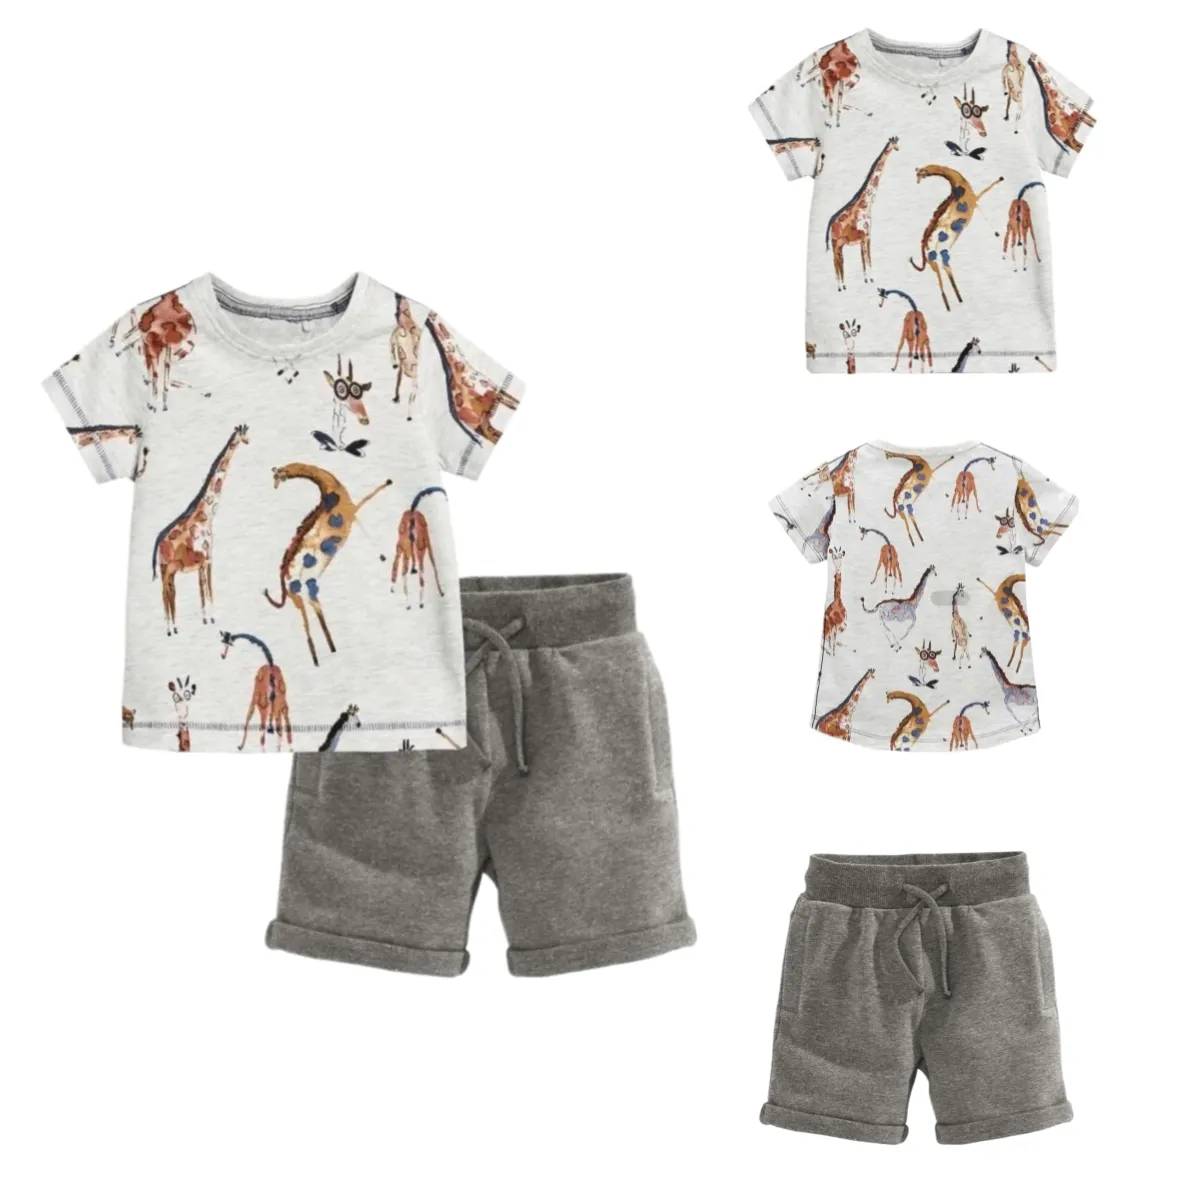 American style summer baby boys' clothing sets cotton kids toddler clothing sets boy boys summer clothing sets